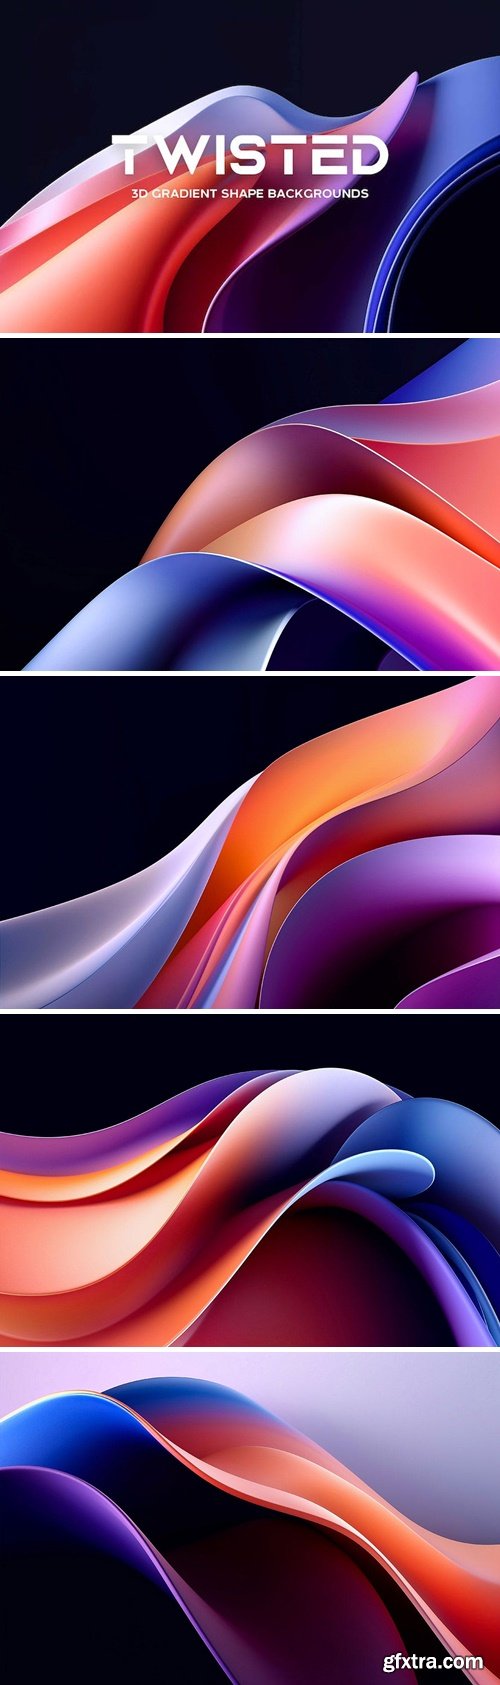 Gradient Twisted Shape Backgrounds 6K26475